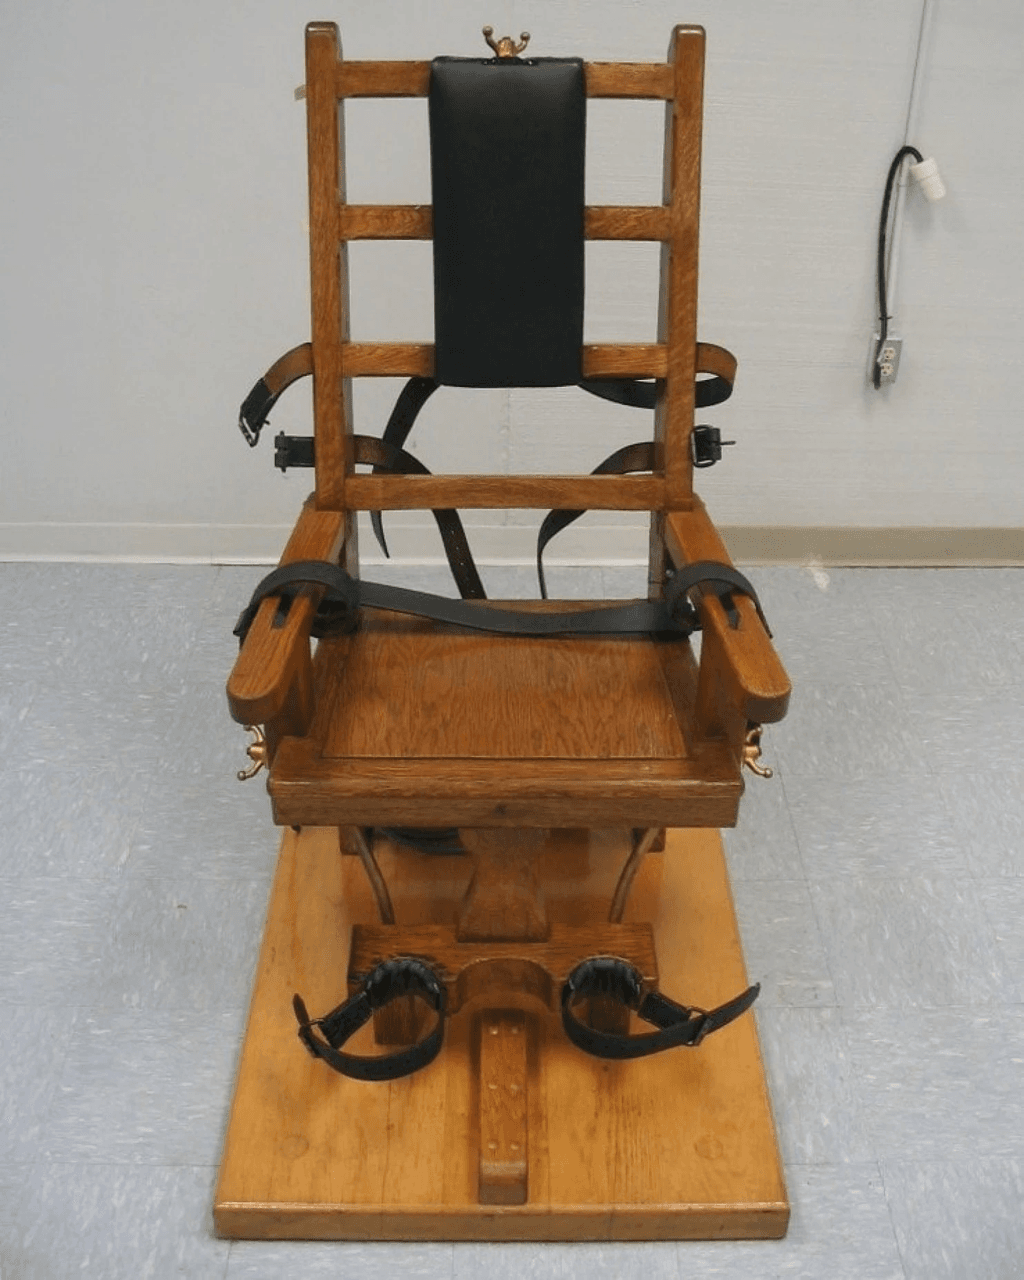 South Carolina Legislature Authorizes Use of Electric Chair and Firing Squad as State Reaches 10 Years Without an Execution